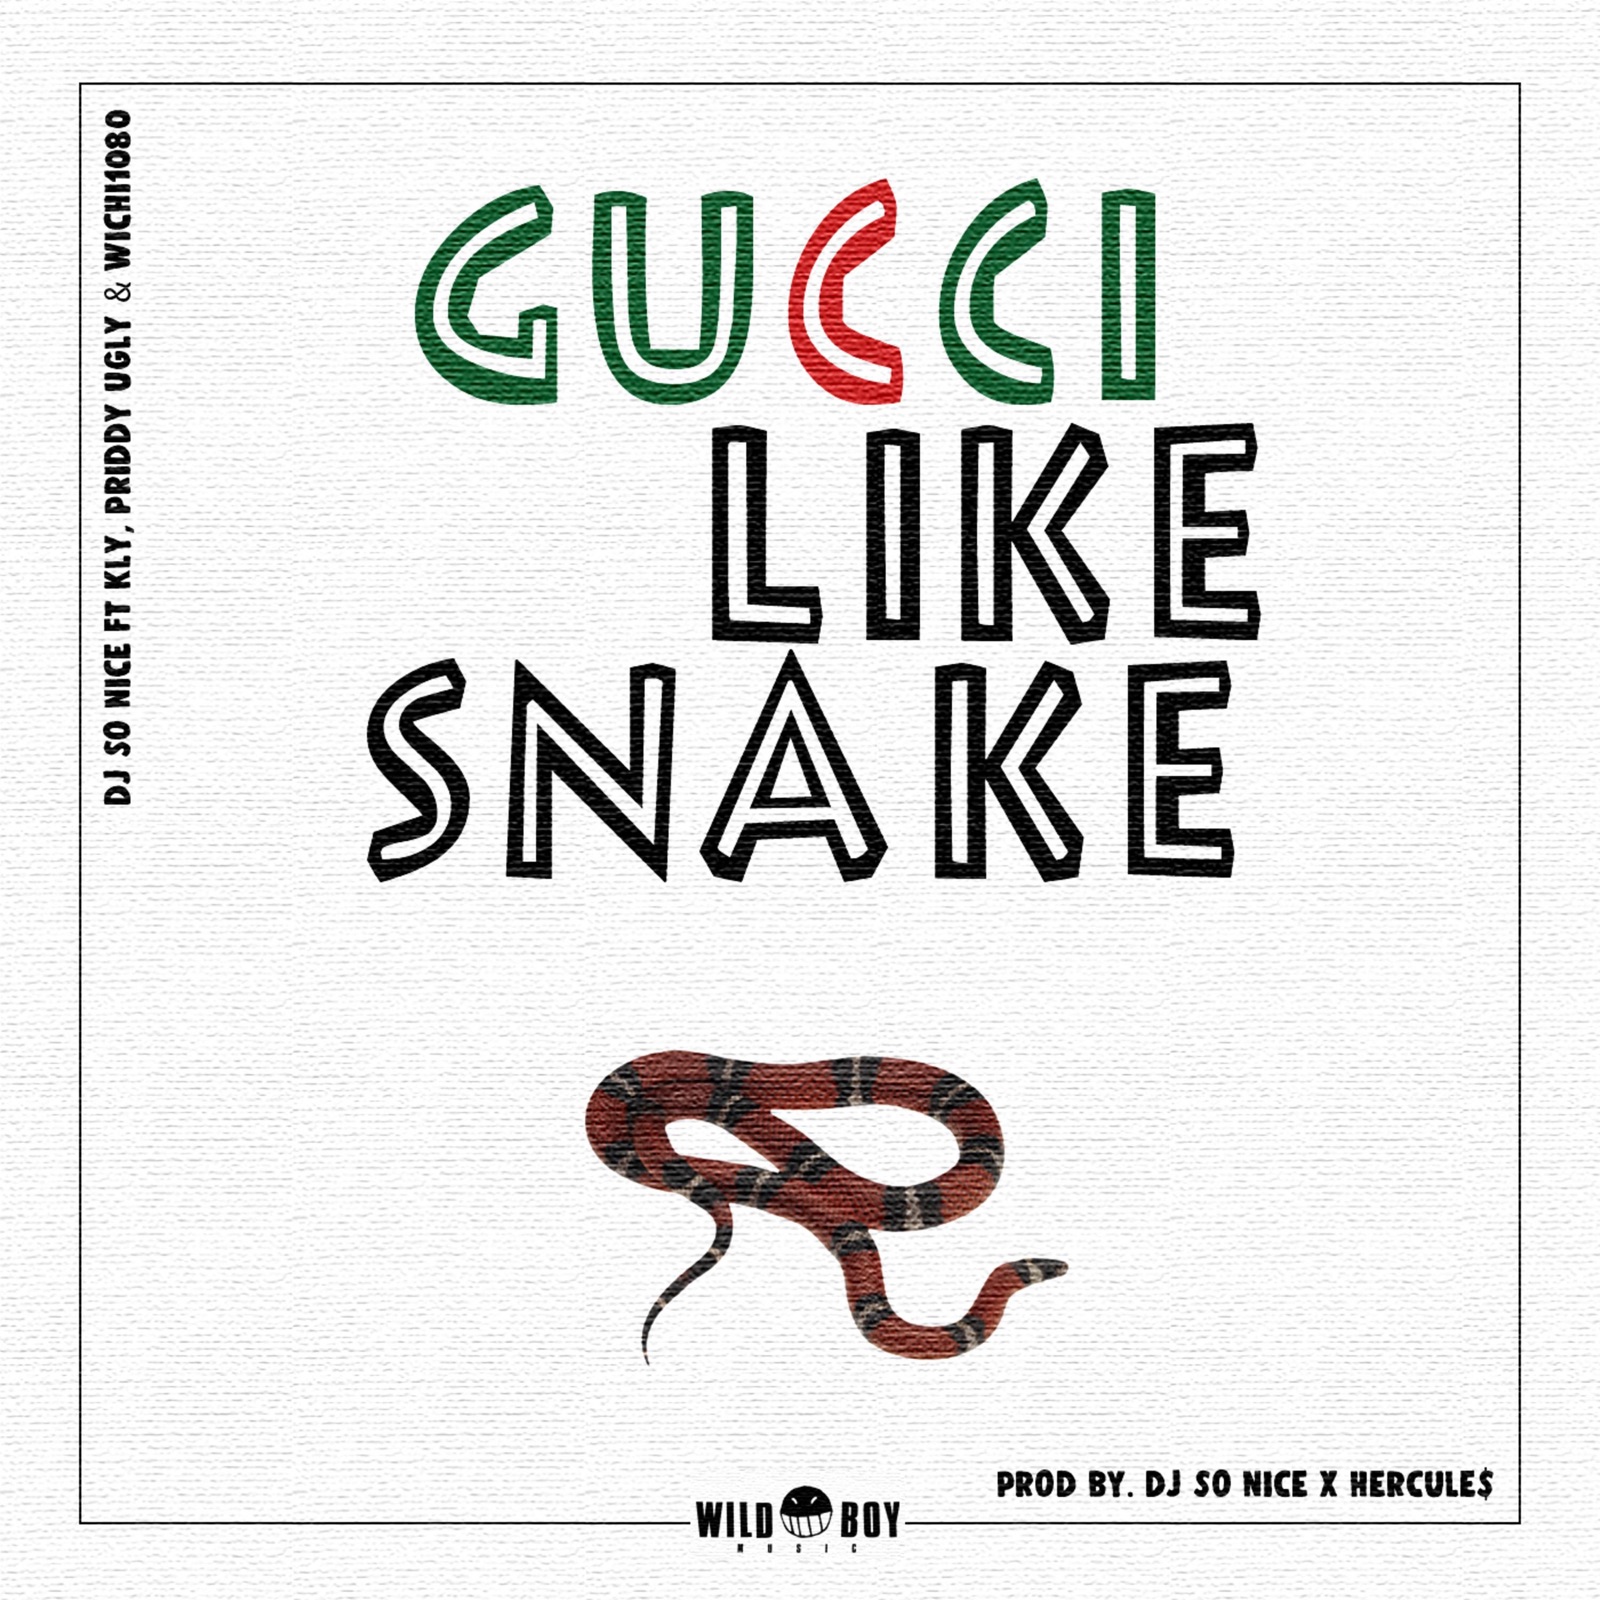 Gucci Like Snake (feat. KLY, Priddy Ugly & Wichi 1080)